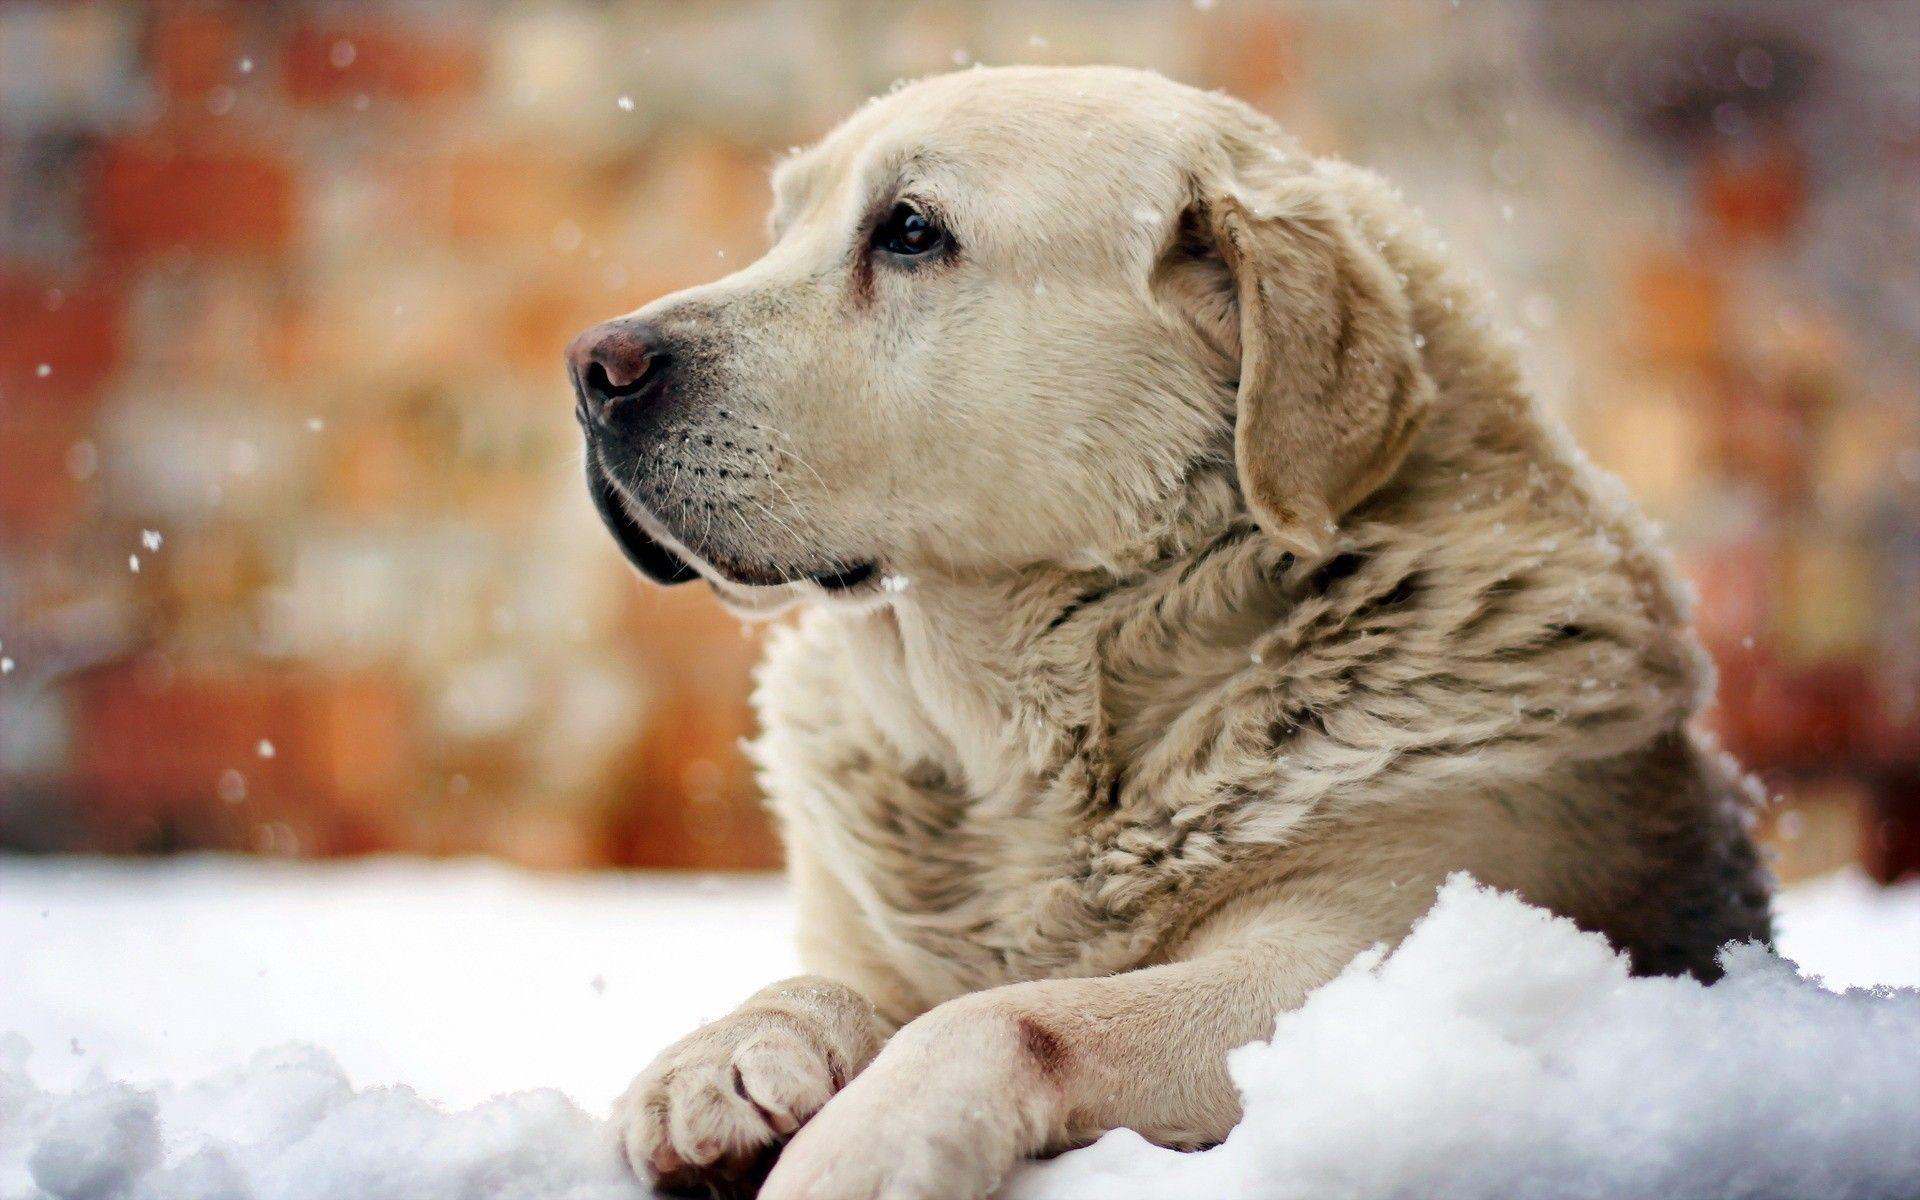 Winter Dog Wallpapers - Top Free Winter Dog Backgrounds - WallpaperAccess